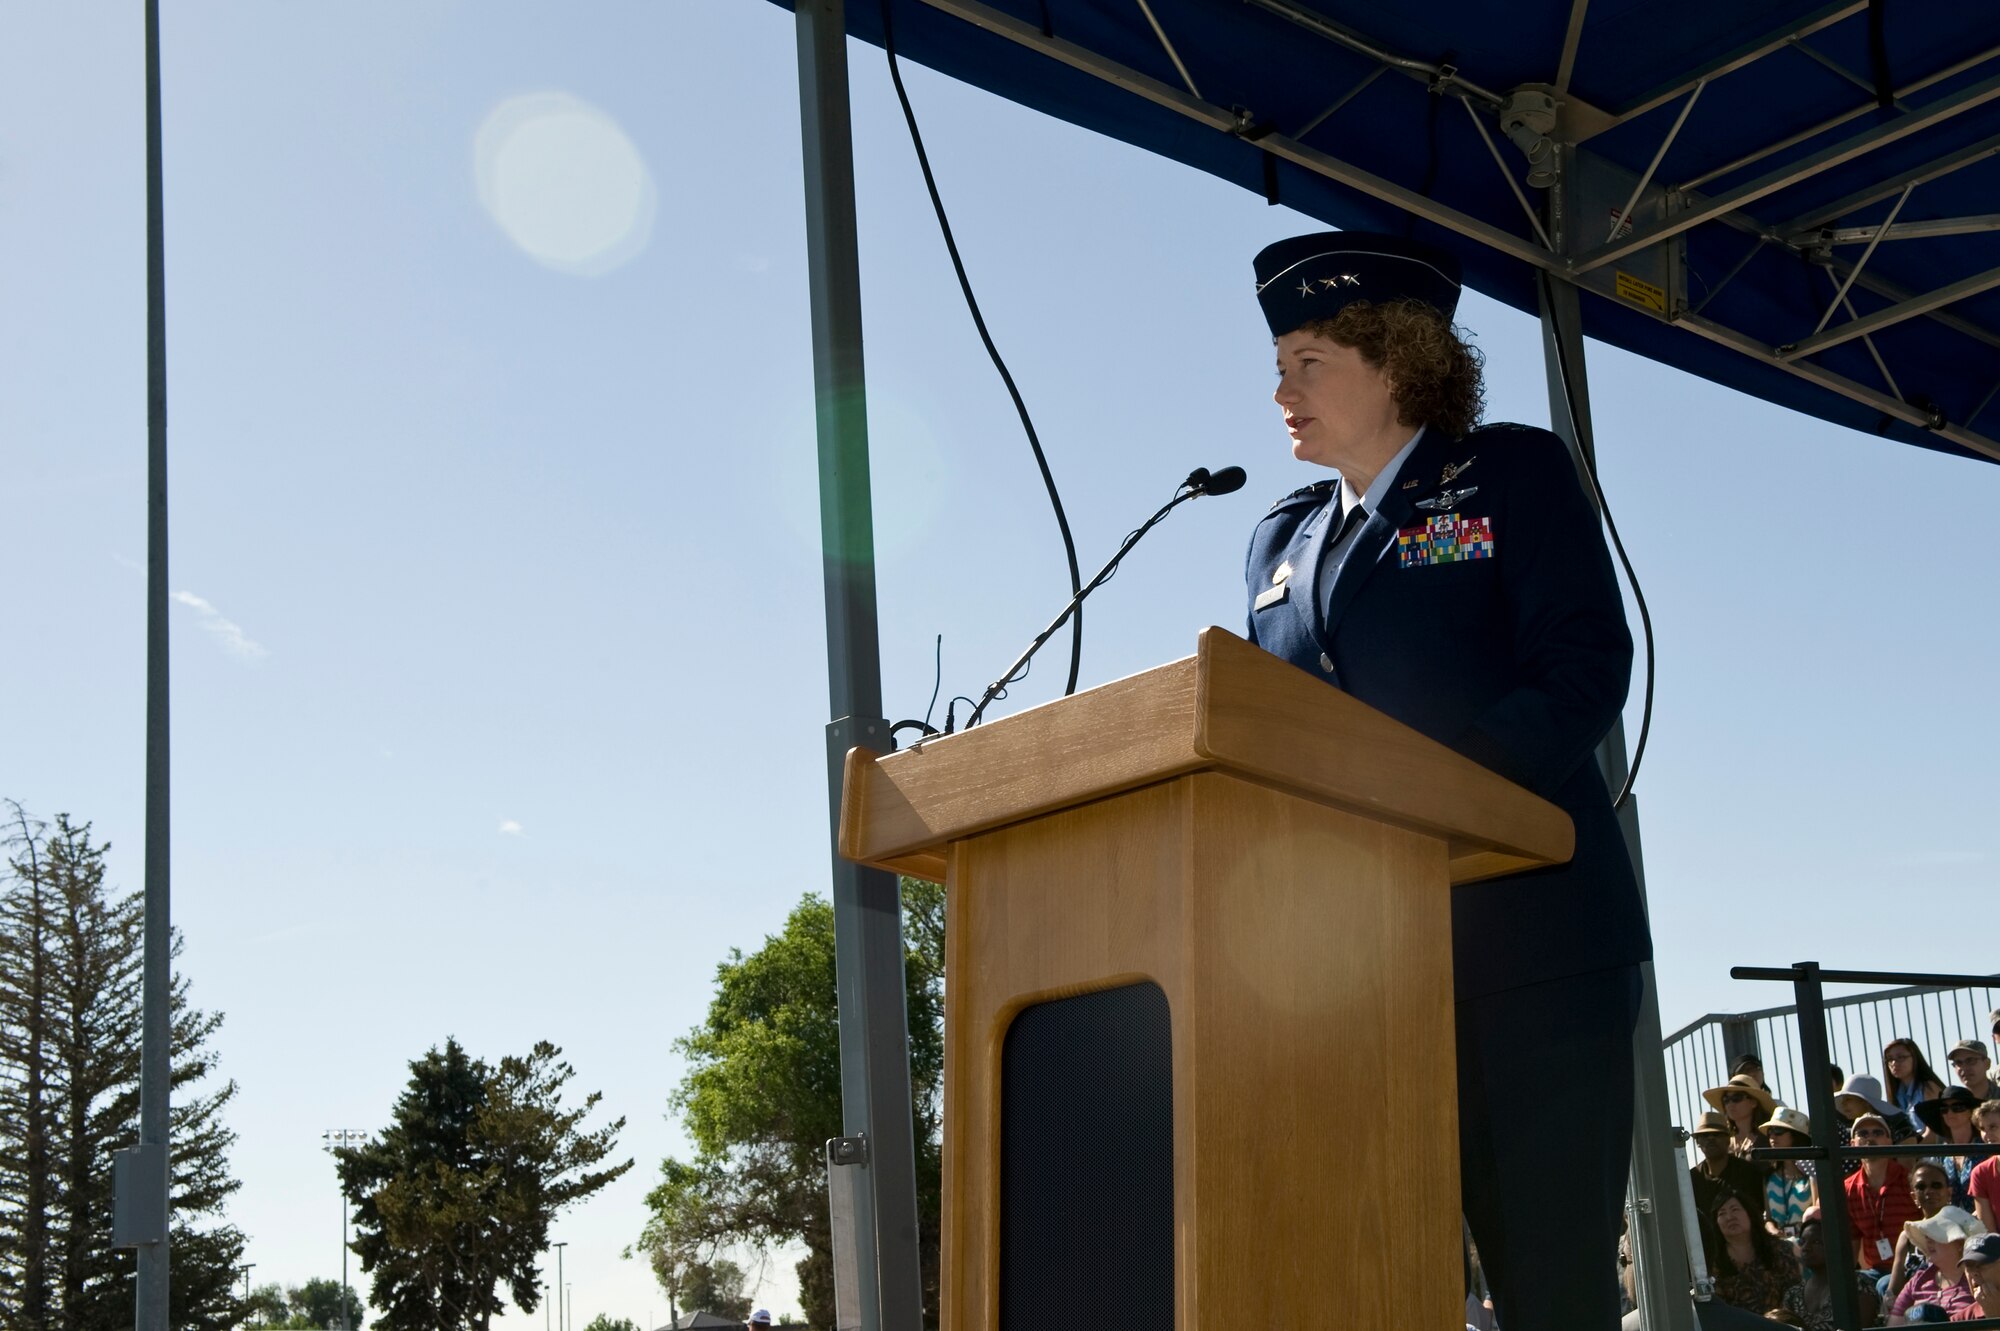 Lt. Gen. Susan J. Helms, 14th Air Force commander, addresses members of the 460th Space Wing June 28, 2013, during the 460th SW change of command ceremony on Buckley Air Force Base, Colo. (U.S. Air Force photo by Senior Airman Phillip Houk/Released)